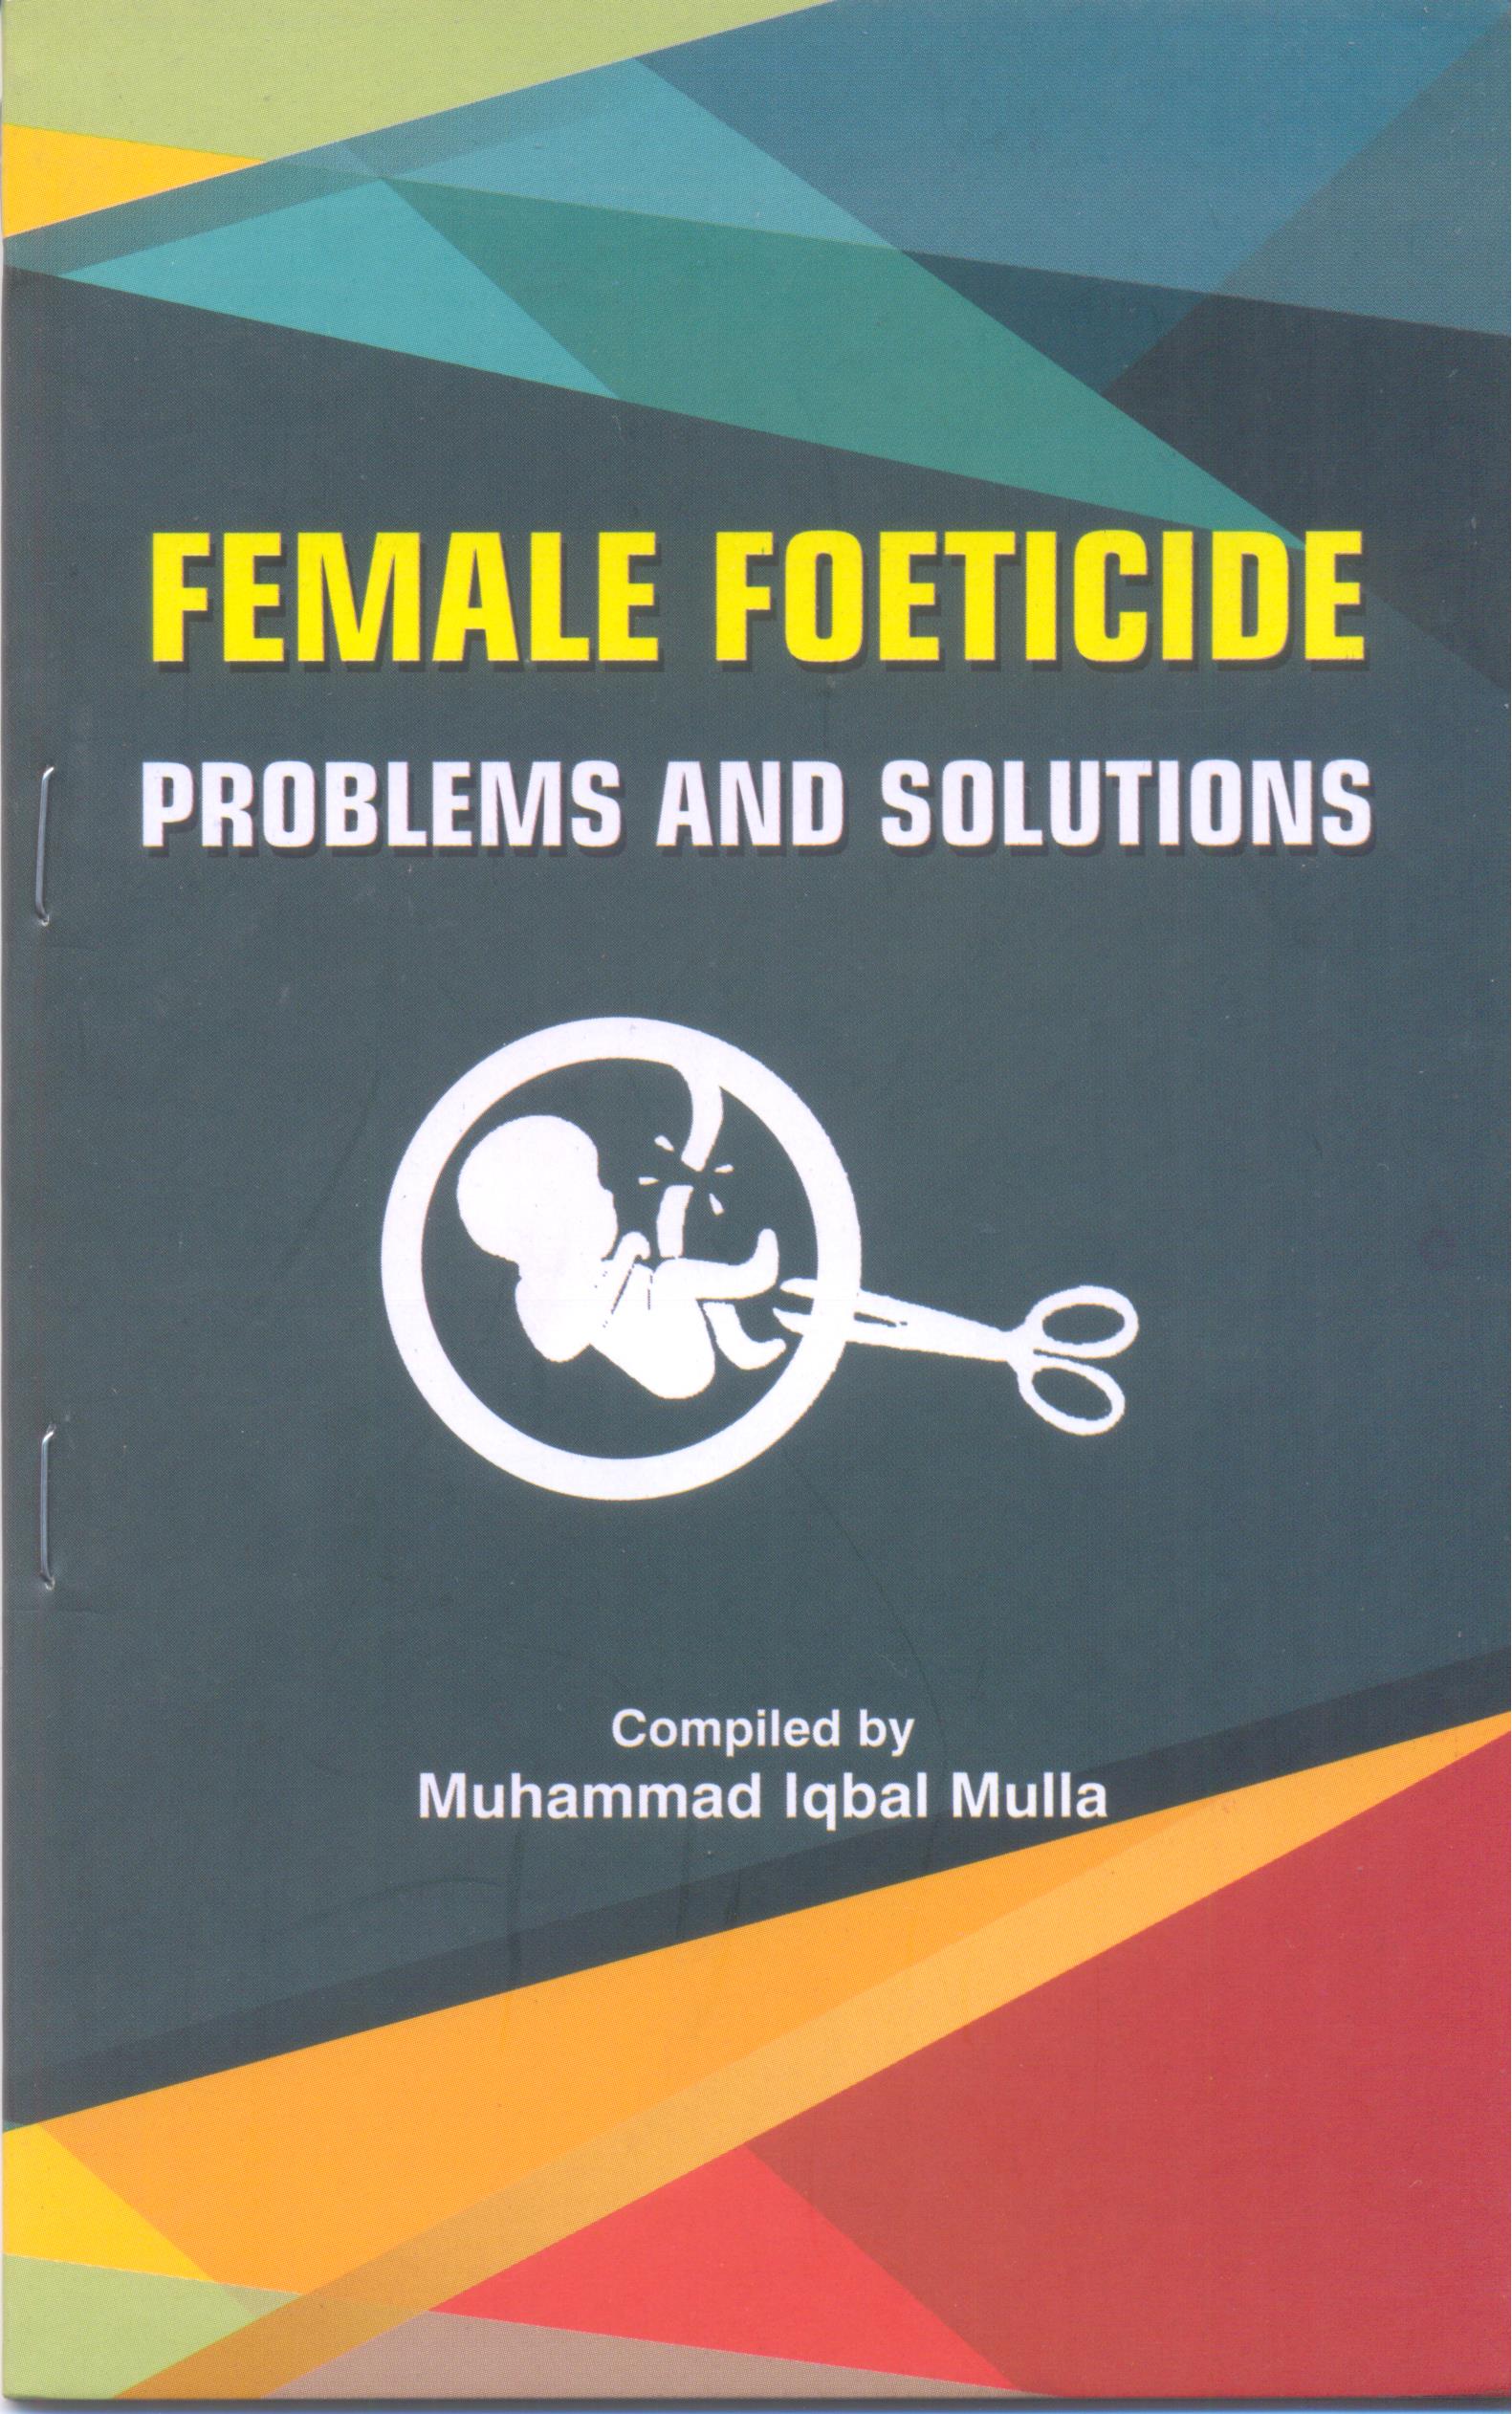 Female Foeticide: Problems and Solutions